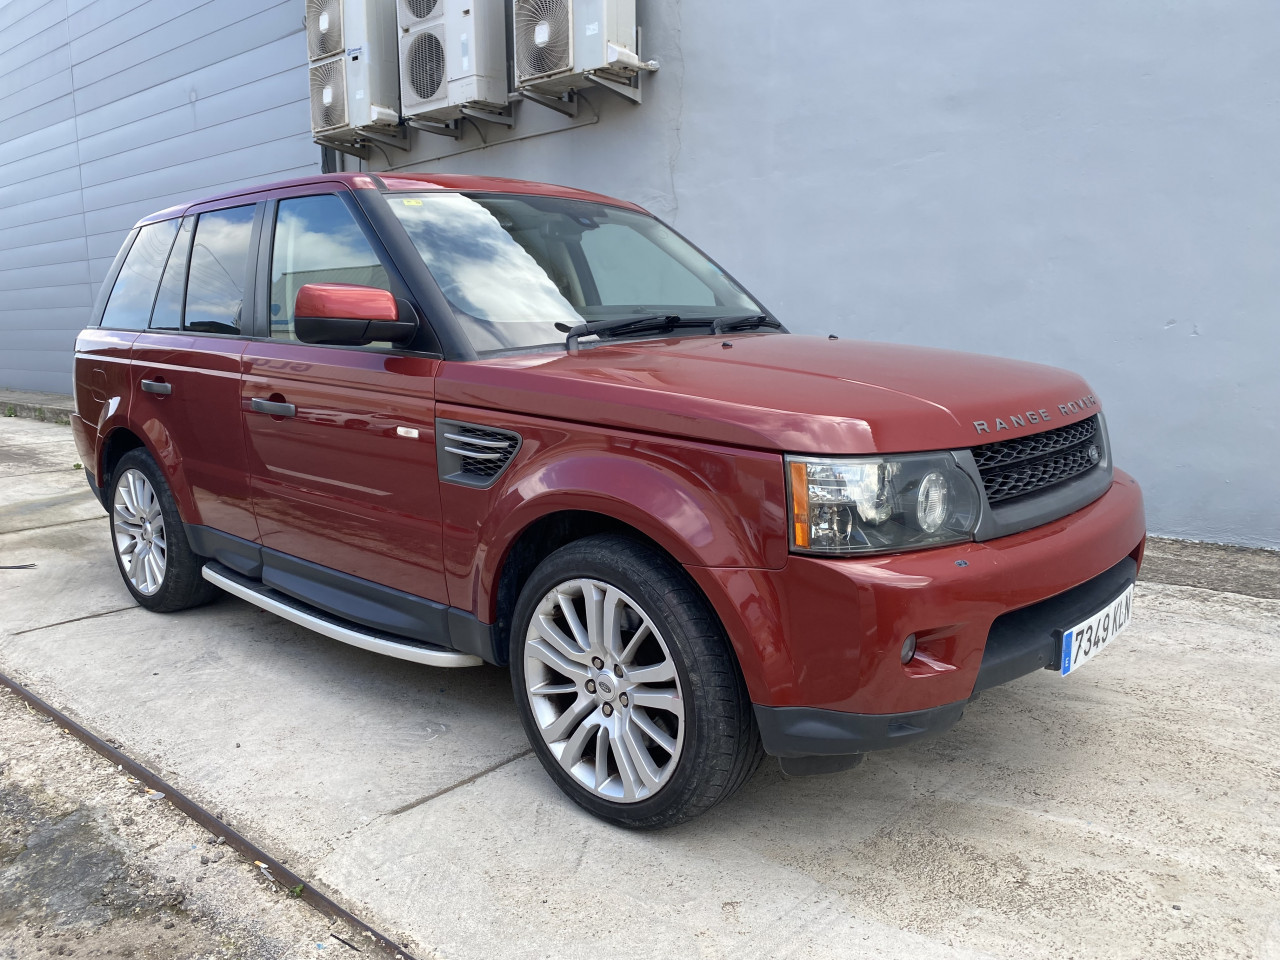 Land Rover Range Rover Sport 3.0 Tdi V6 Hse Automatic 4x4 Photo